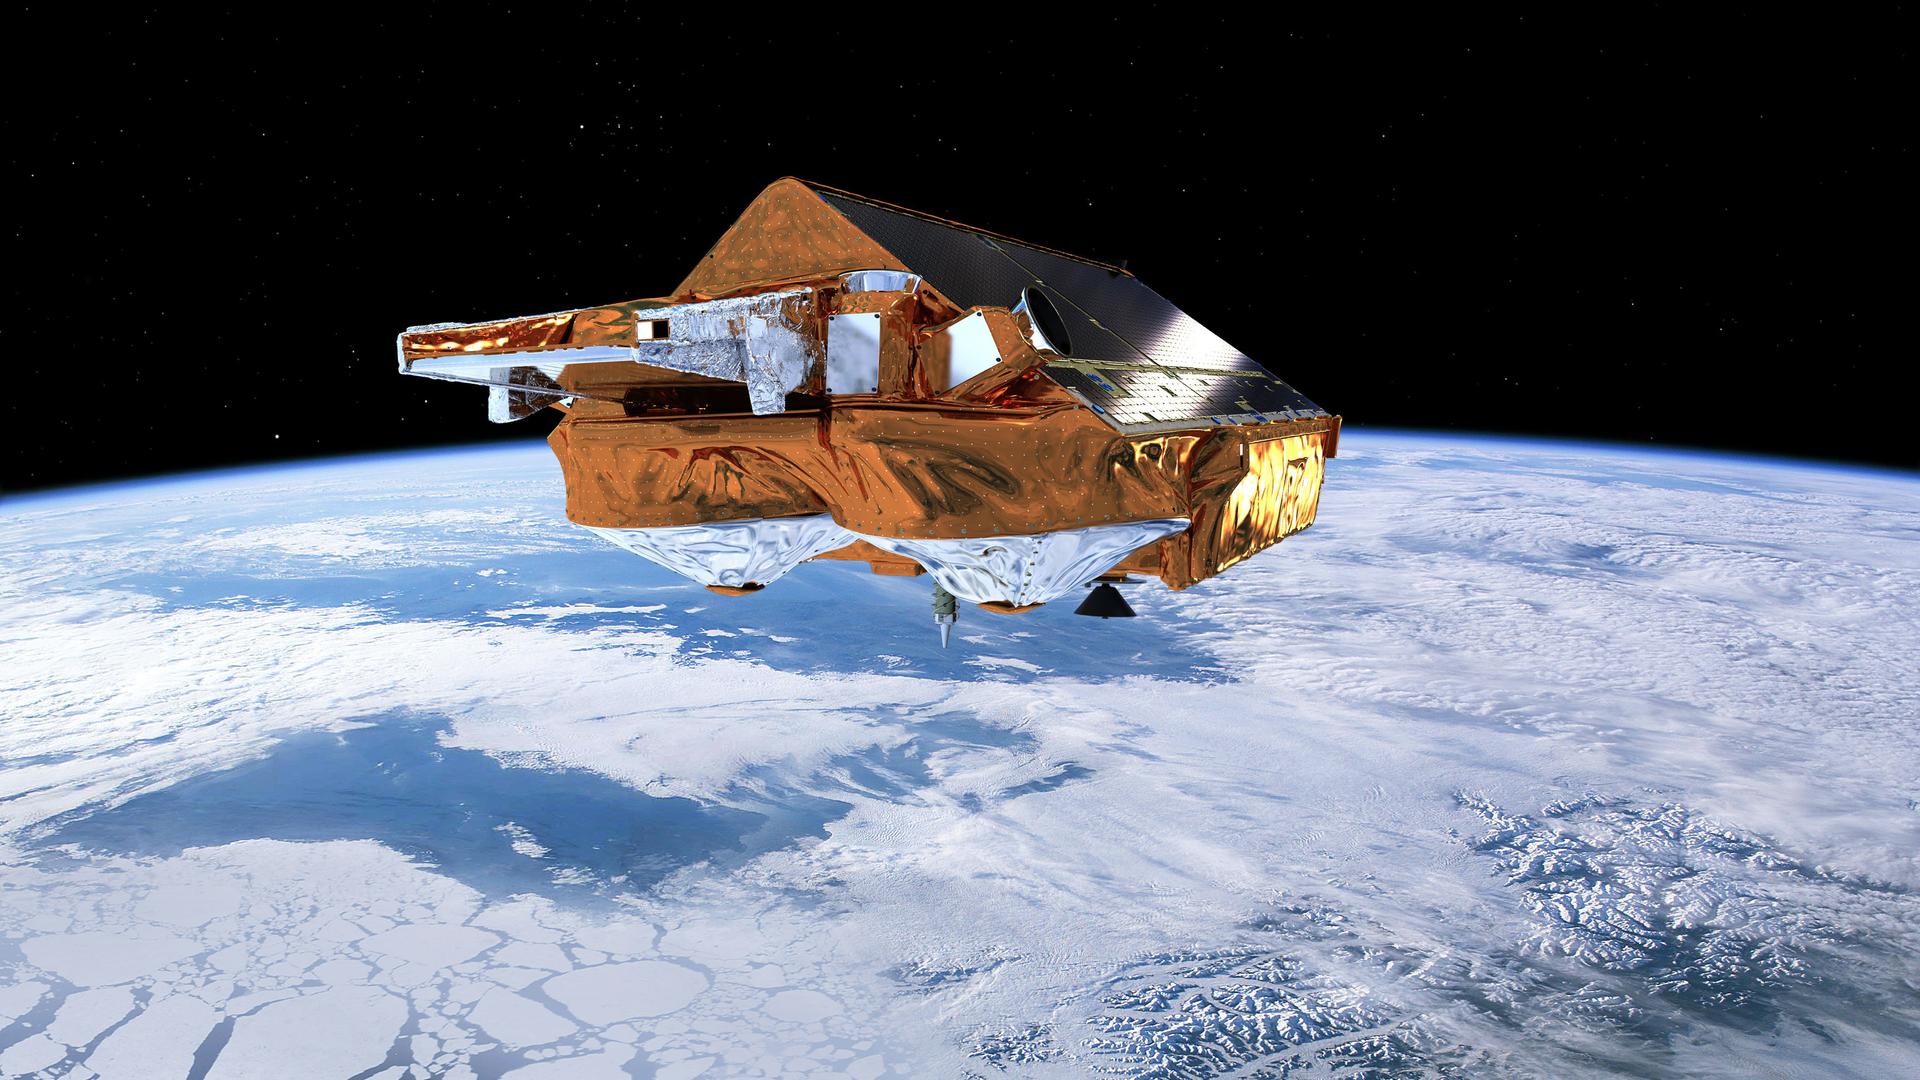 The European Space Agency’s Earth Explorer CryoSat makes precise measurements of changes in the thickness of marine ice floating in the polar oceans, as well as variations in the thickness of the ice sheets of Greenland and Antarctica.